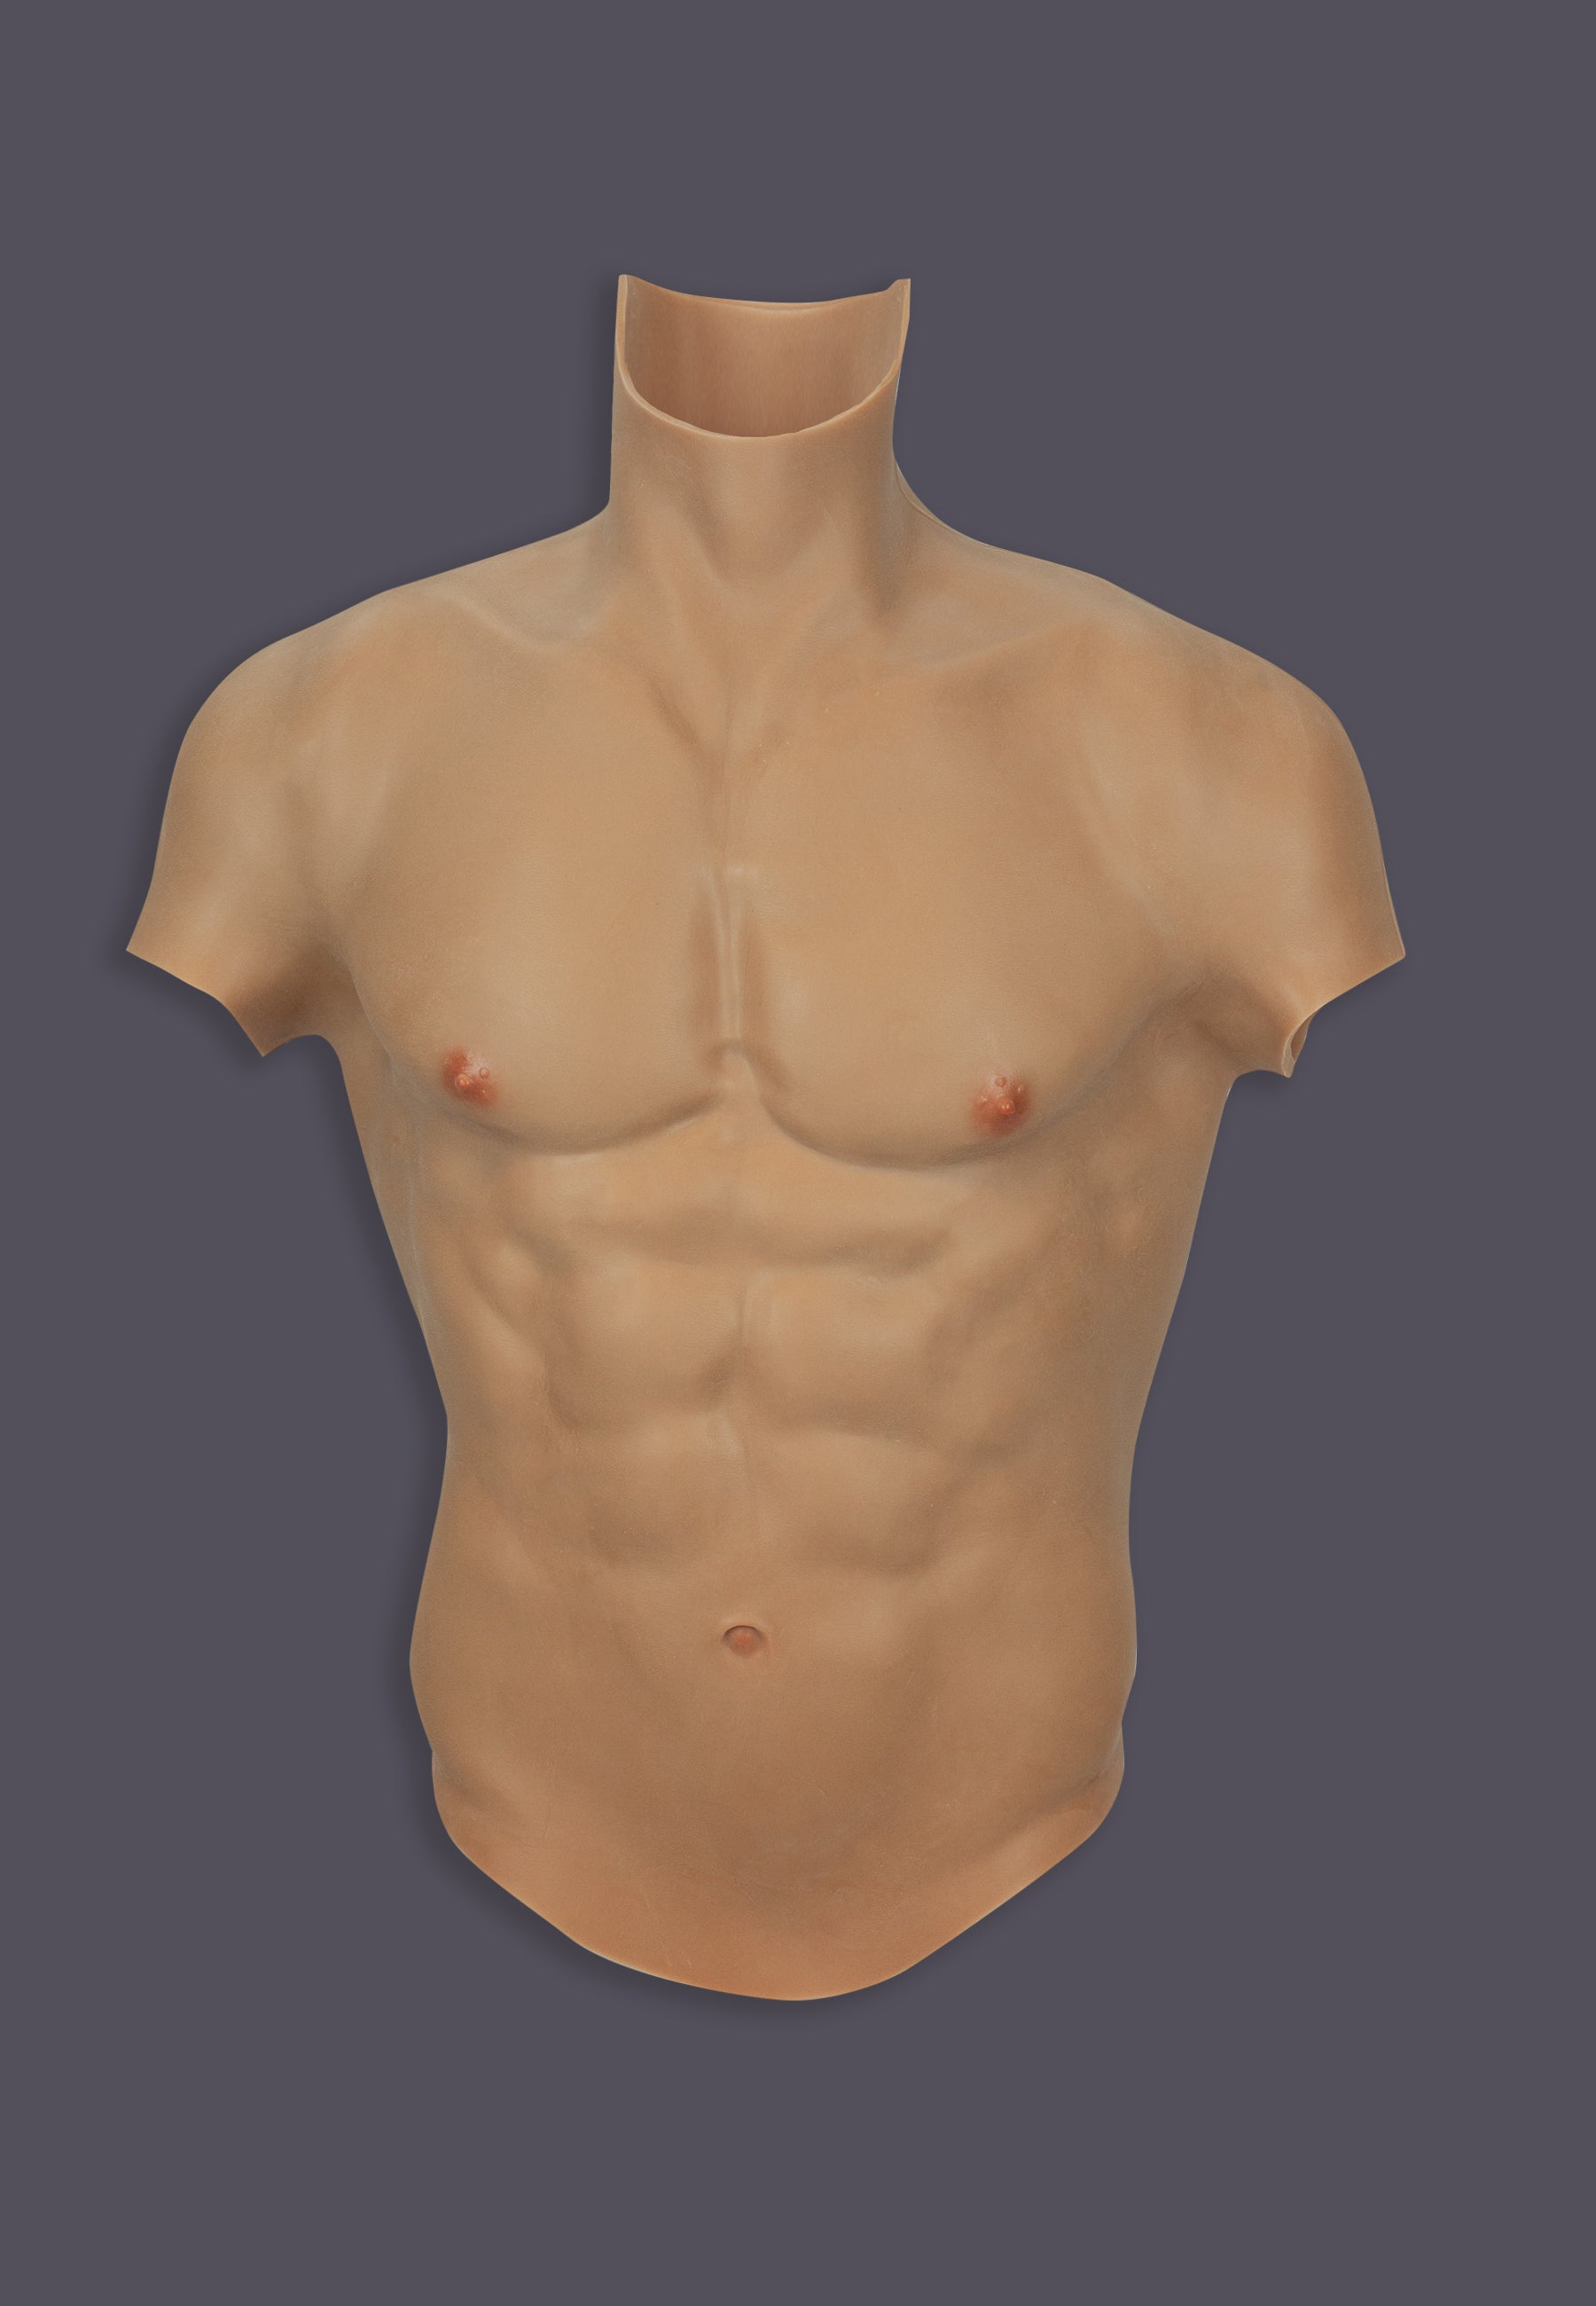 The Male Torso caramel by UNTAG seen from the front